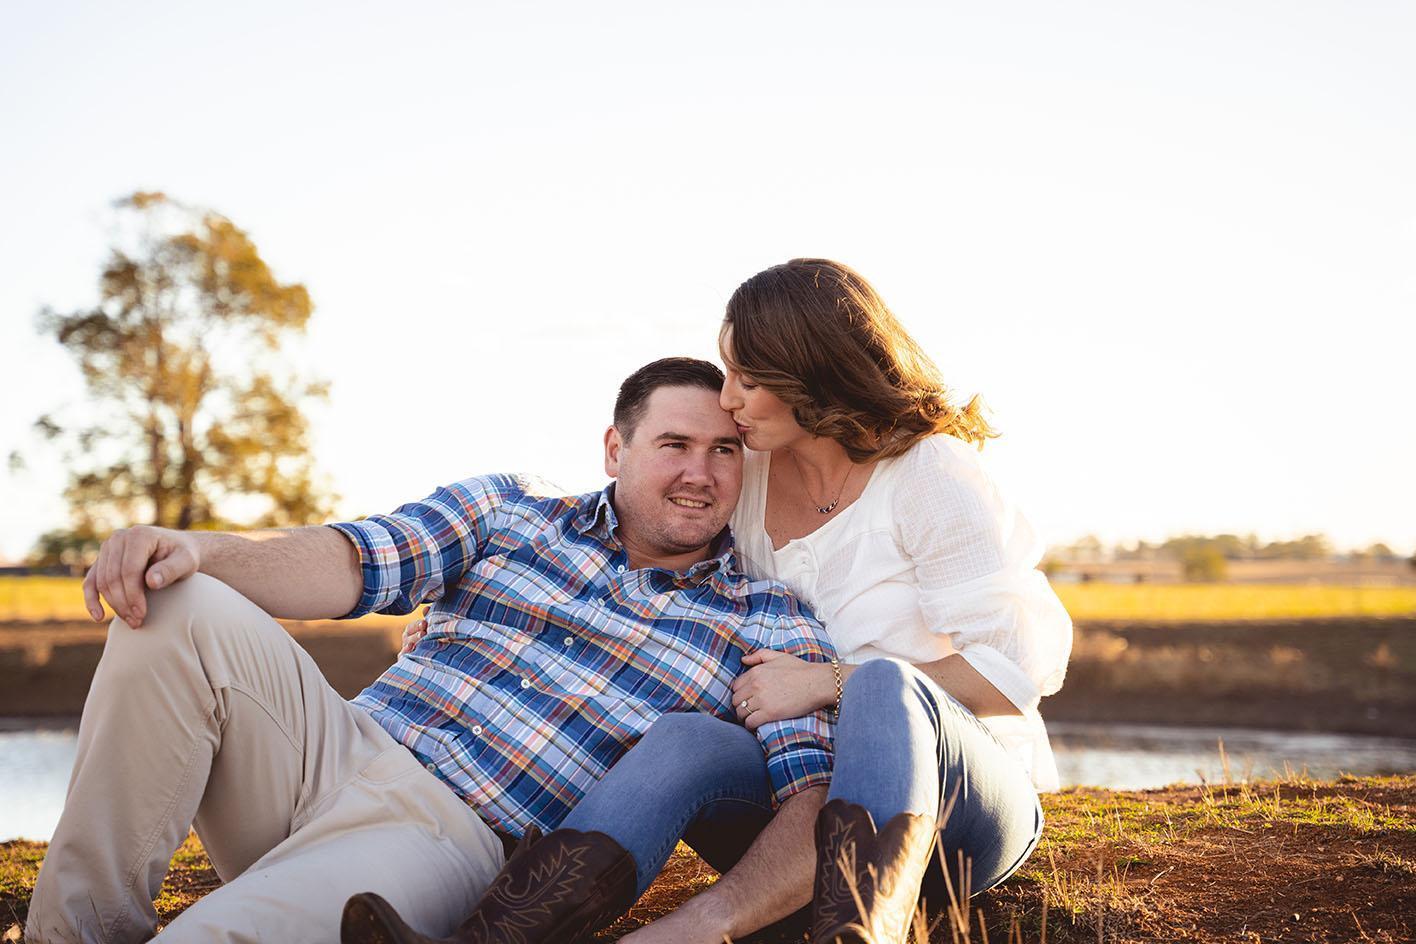 Engagement Photography - couple in field